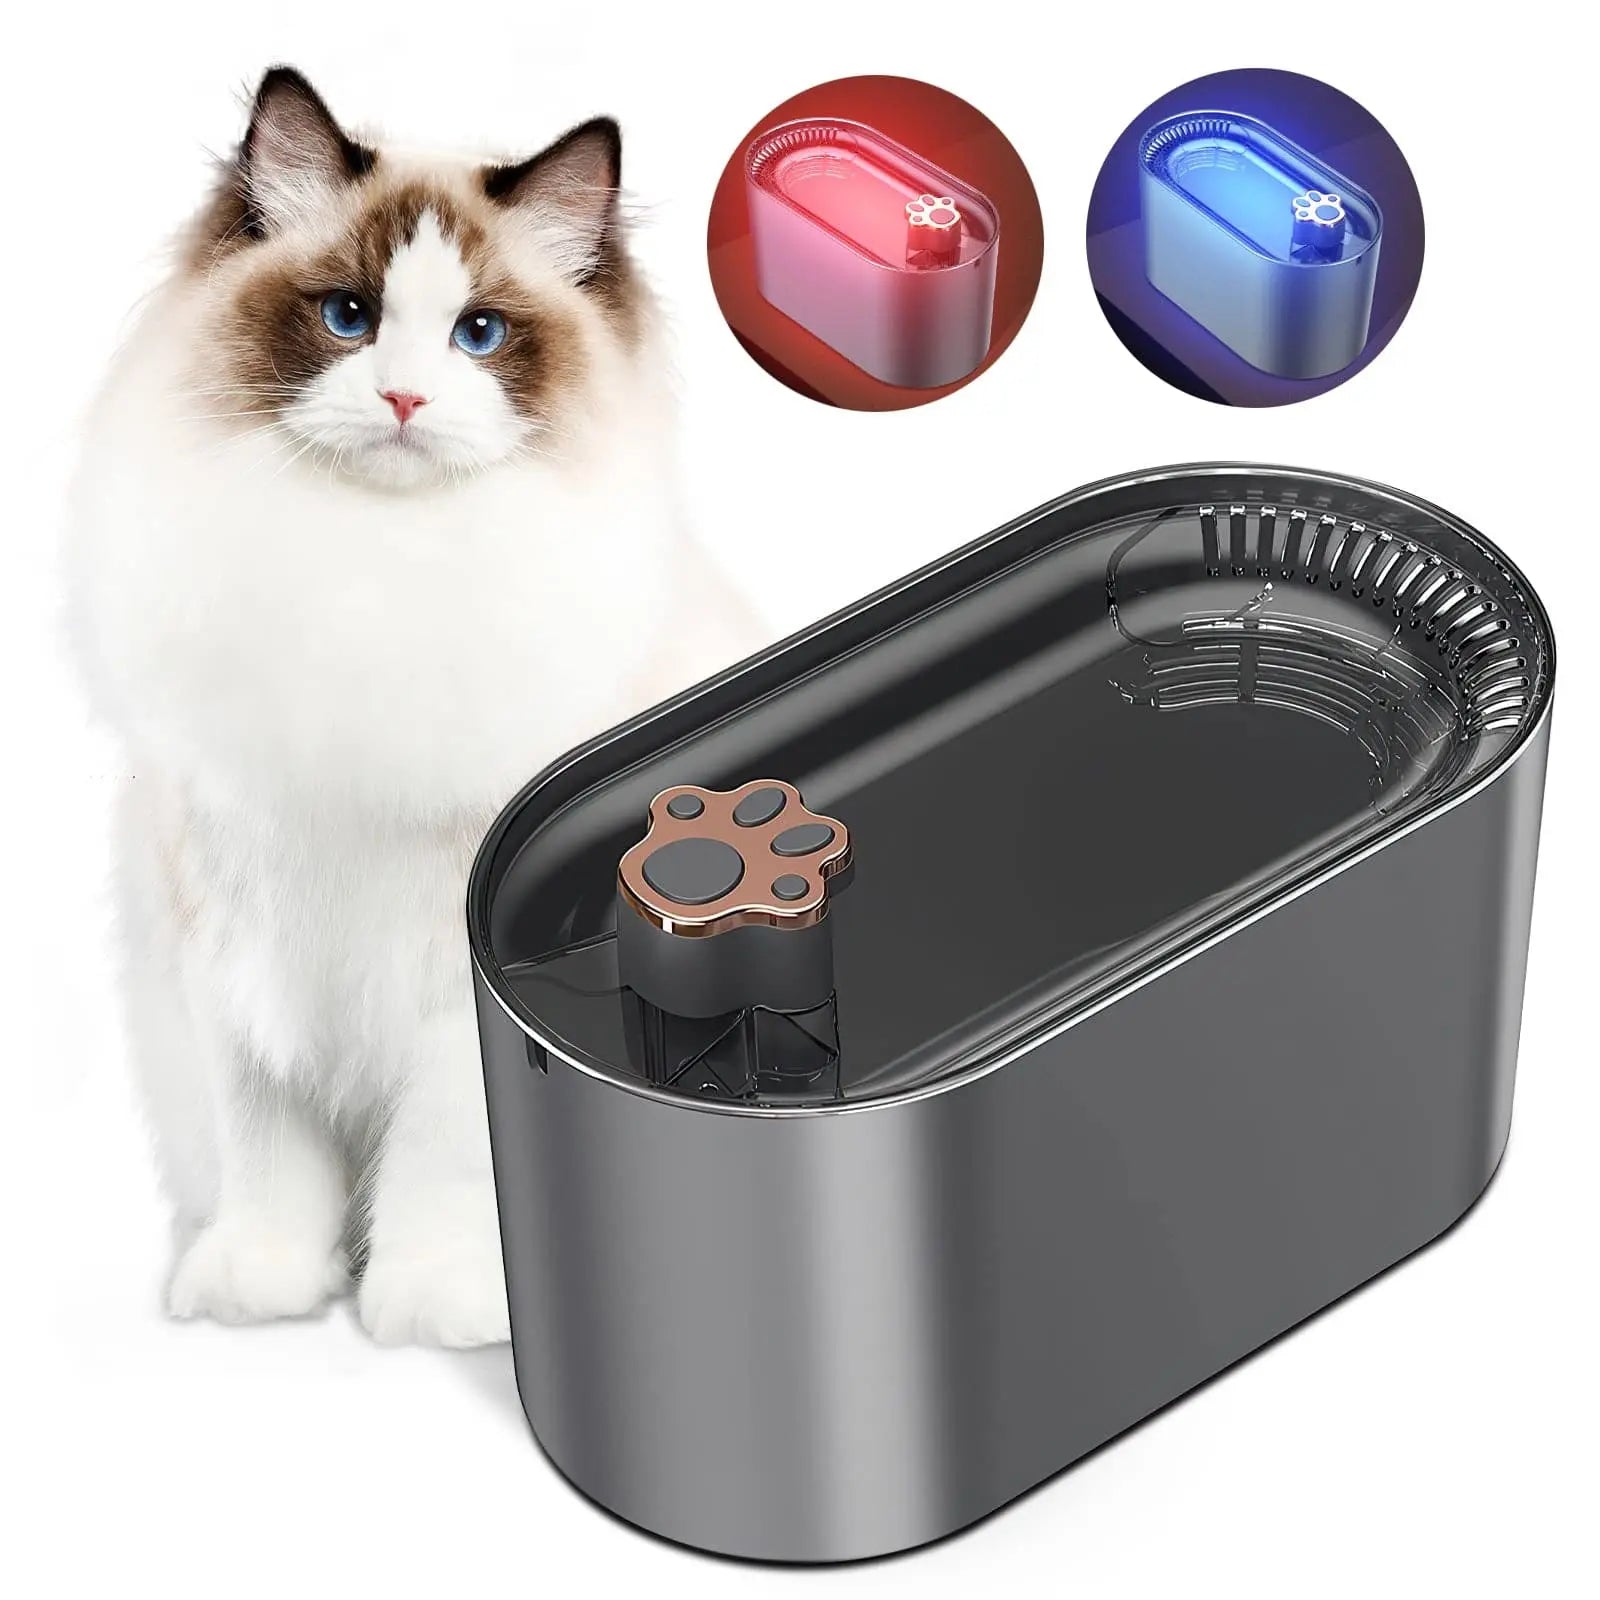 3L Automatic Pet Water Fountain...Ultra-Quiet w/ LED Light